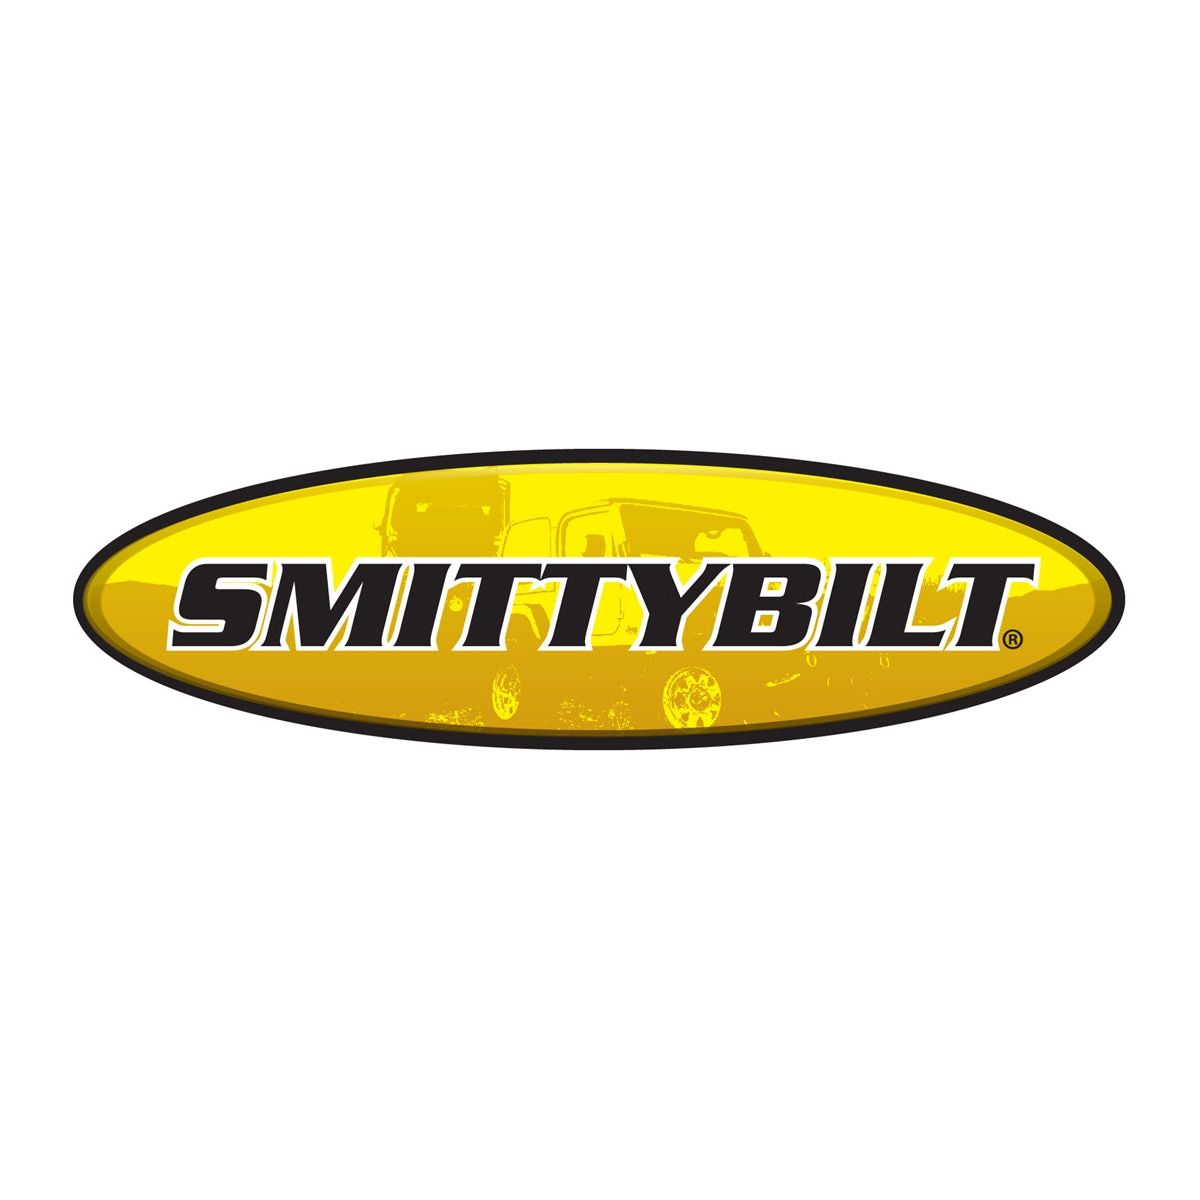 Smittybilt G.E.A.R. Tailgate Cover, Coyote Tan for 2007-2018 JK